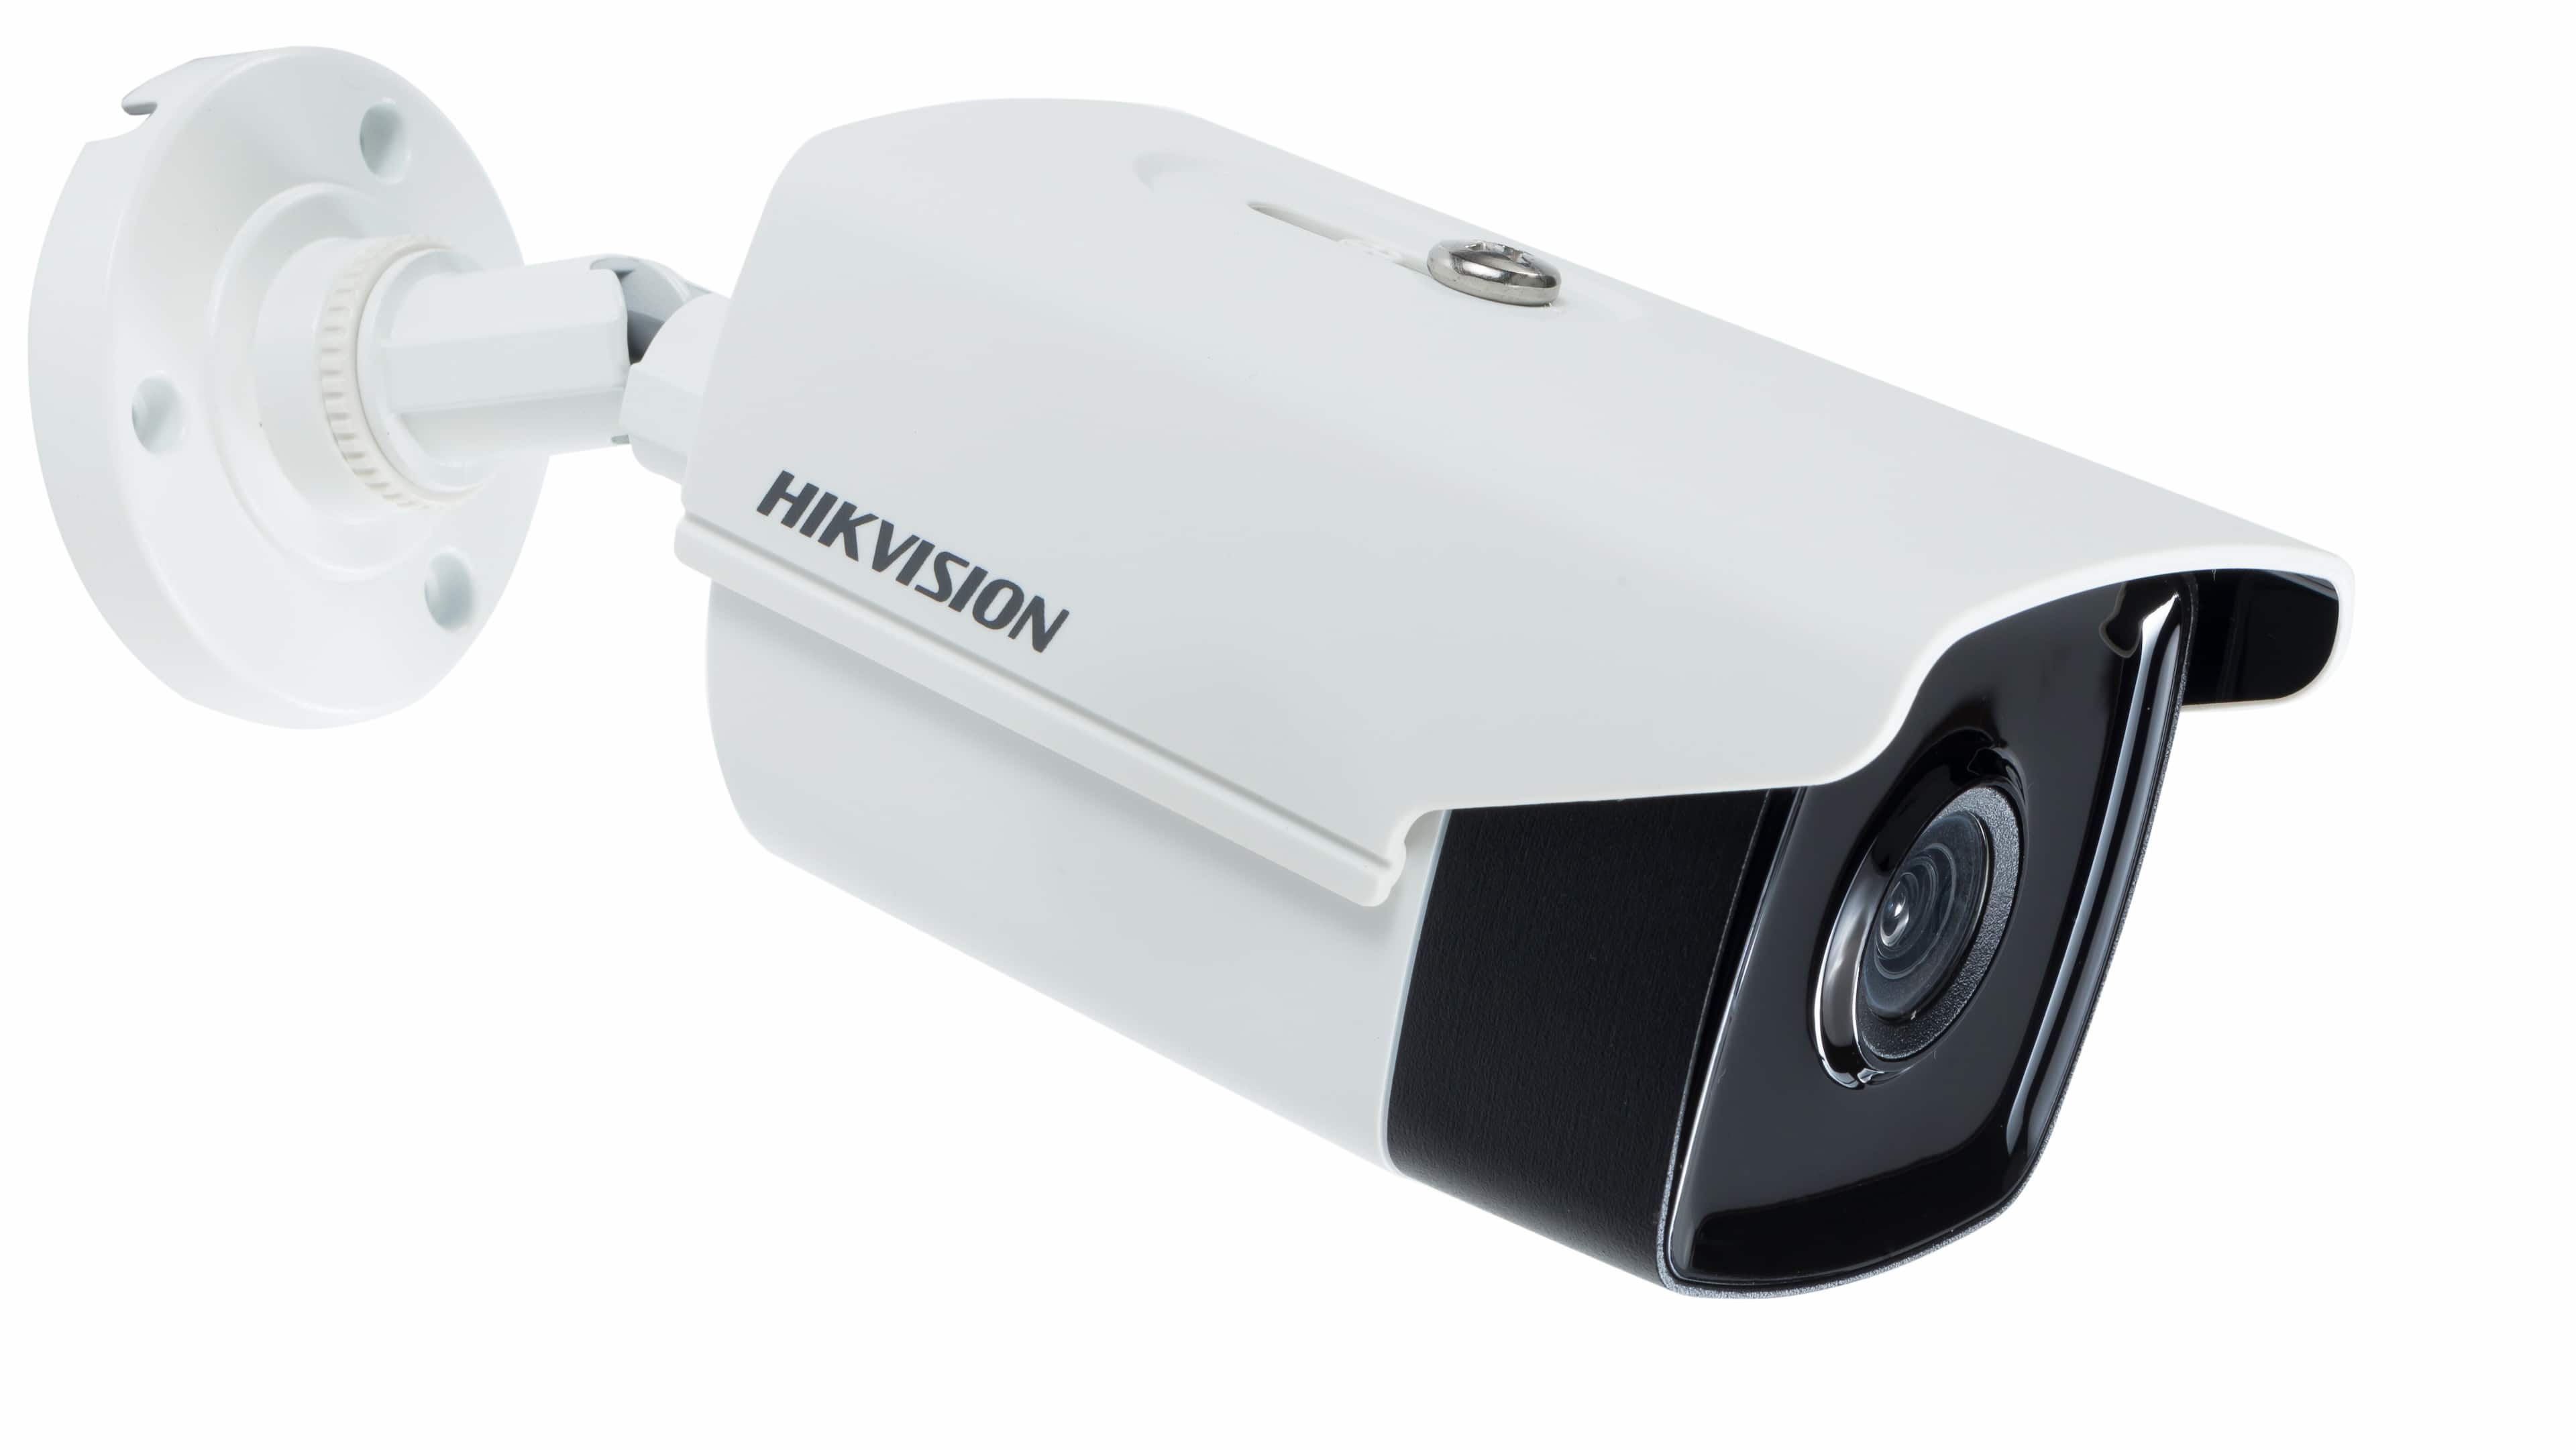 Hikvision-2MP-Analog-HD-IR-Bullet-Camera-DS-2CE1AD0T-IT1F-image_2